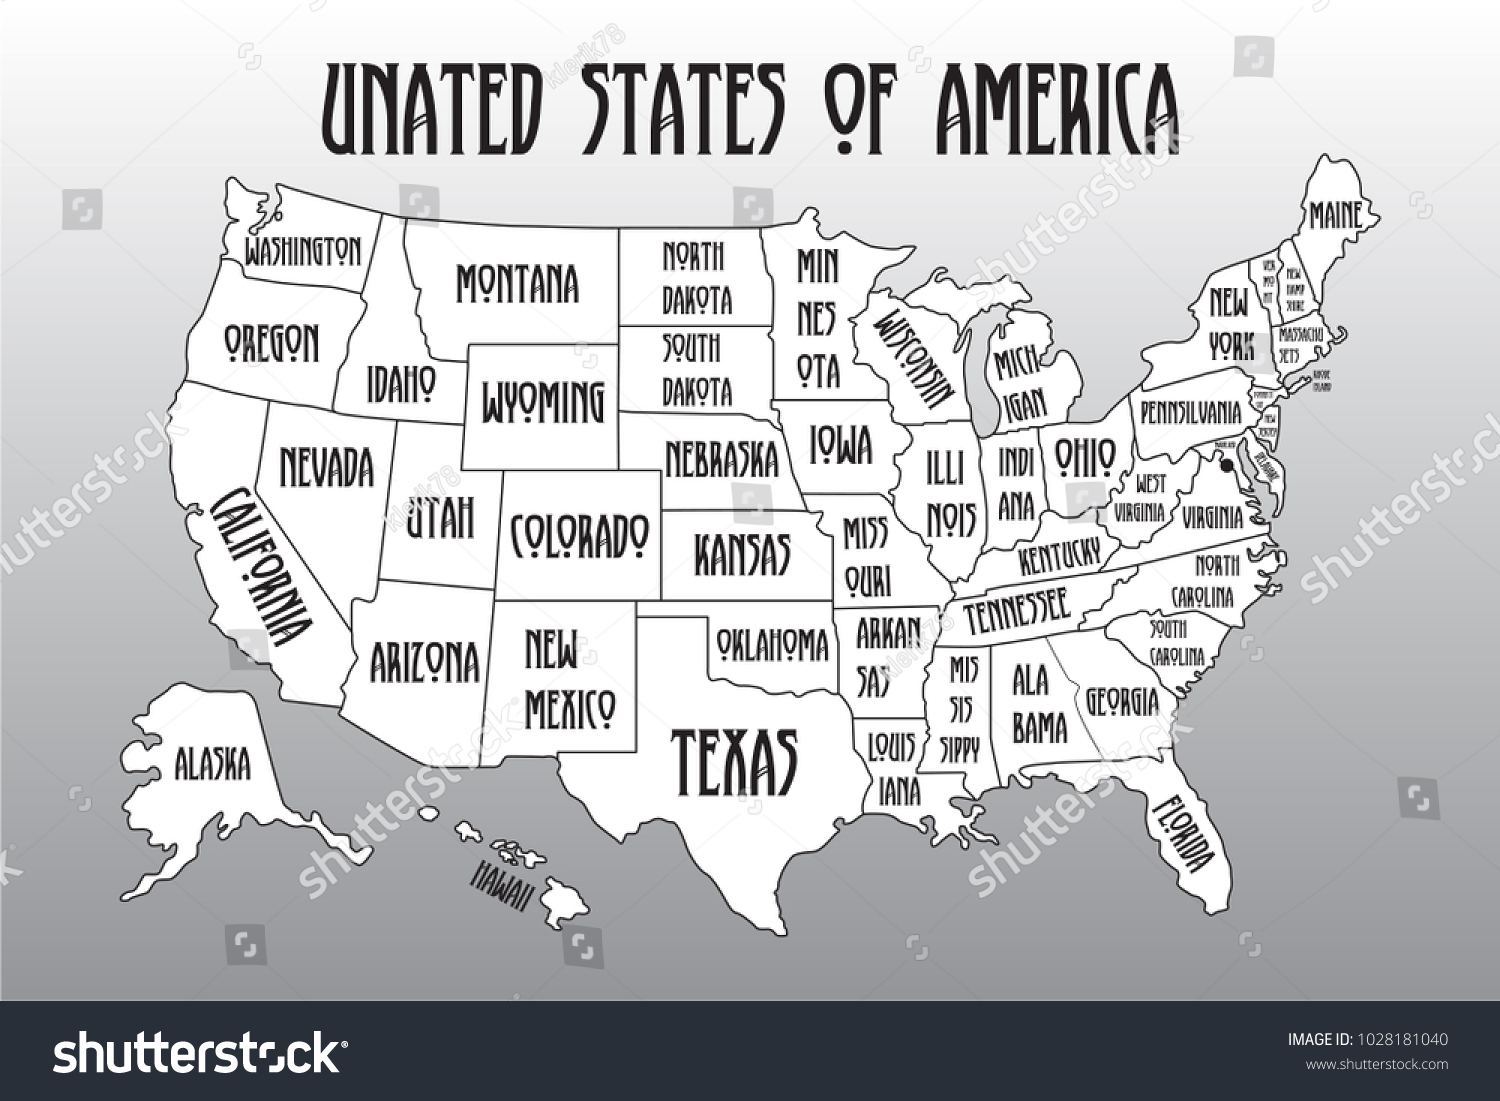 Details about   50 Laminated Black and White States of the United States of America Flashcards. 